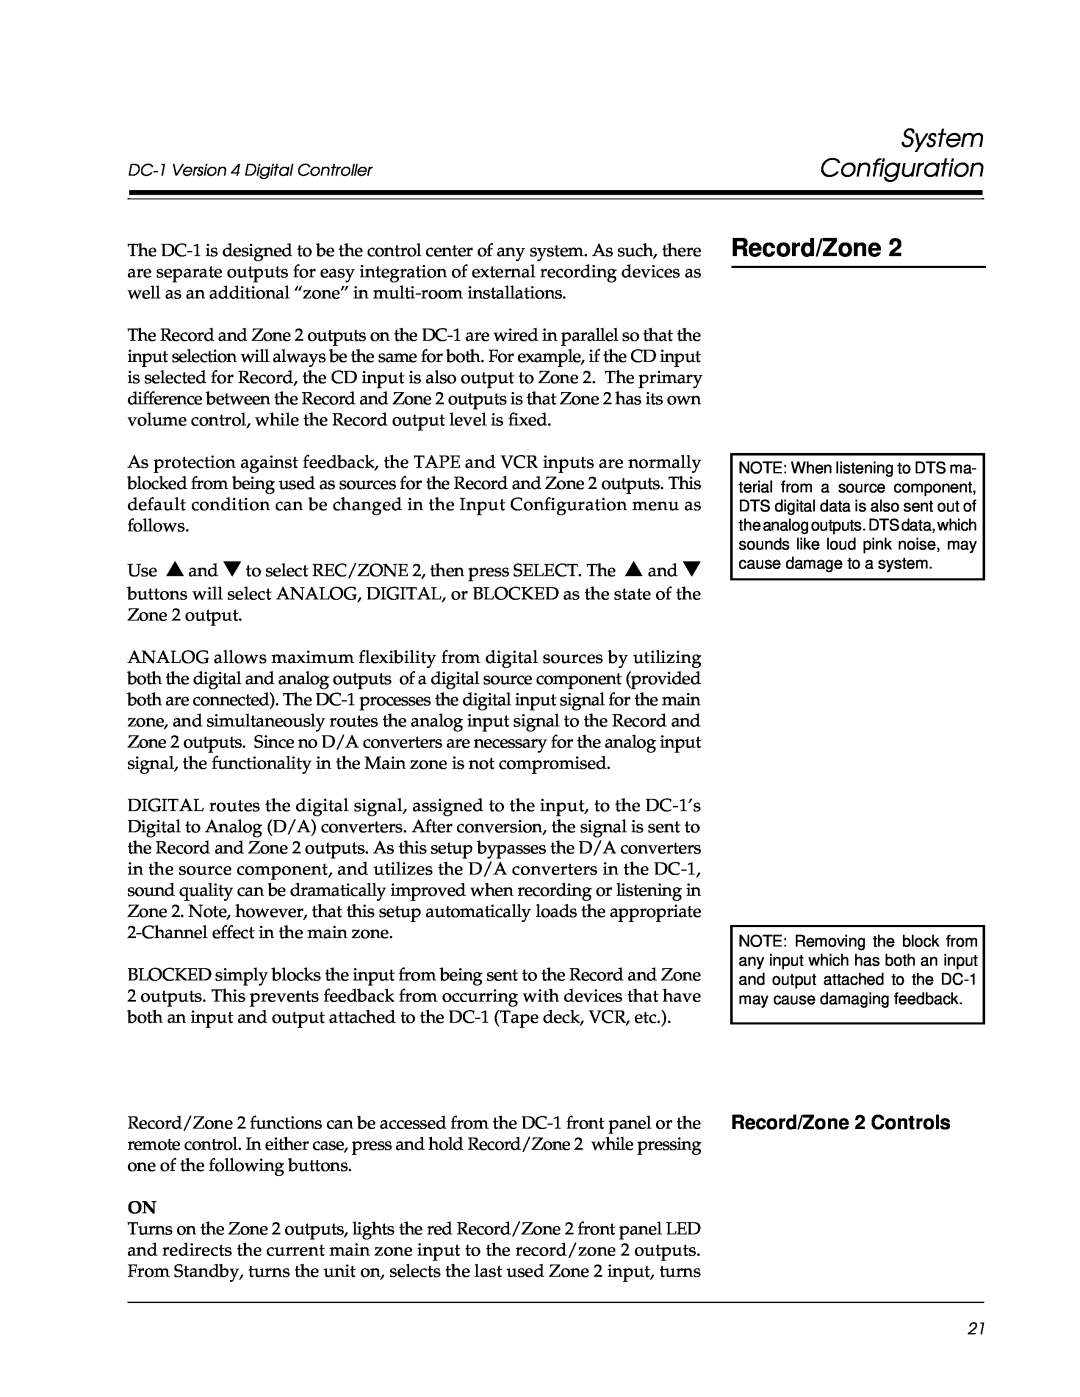 Lexicon Lexicon Part #070-13234 owner manual Record/Zone 2 Controls, System Configuration 